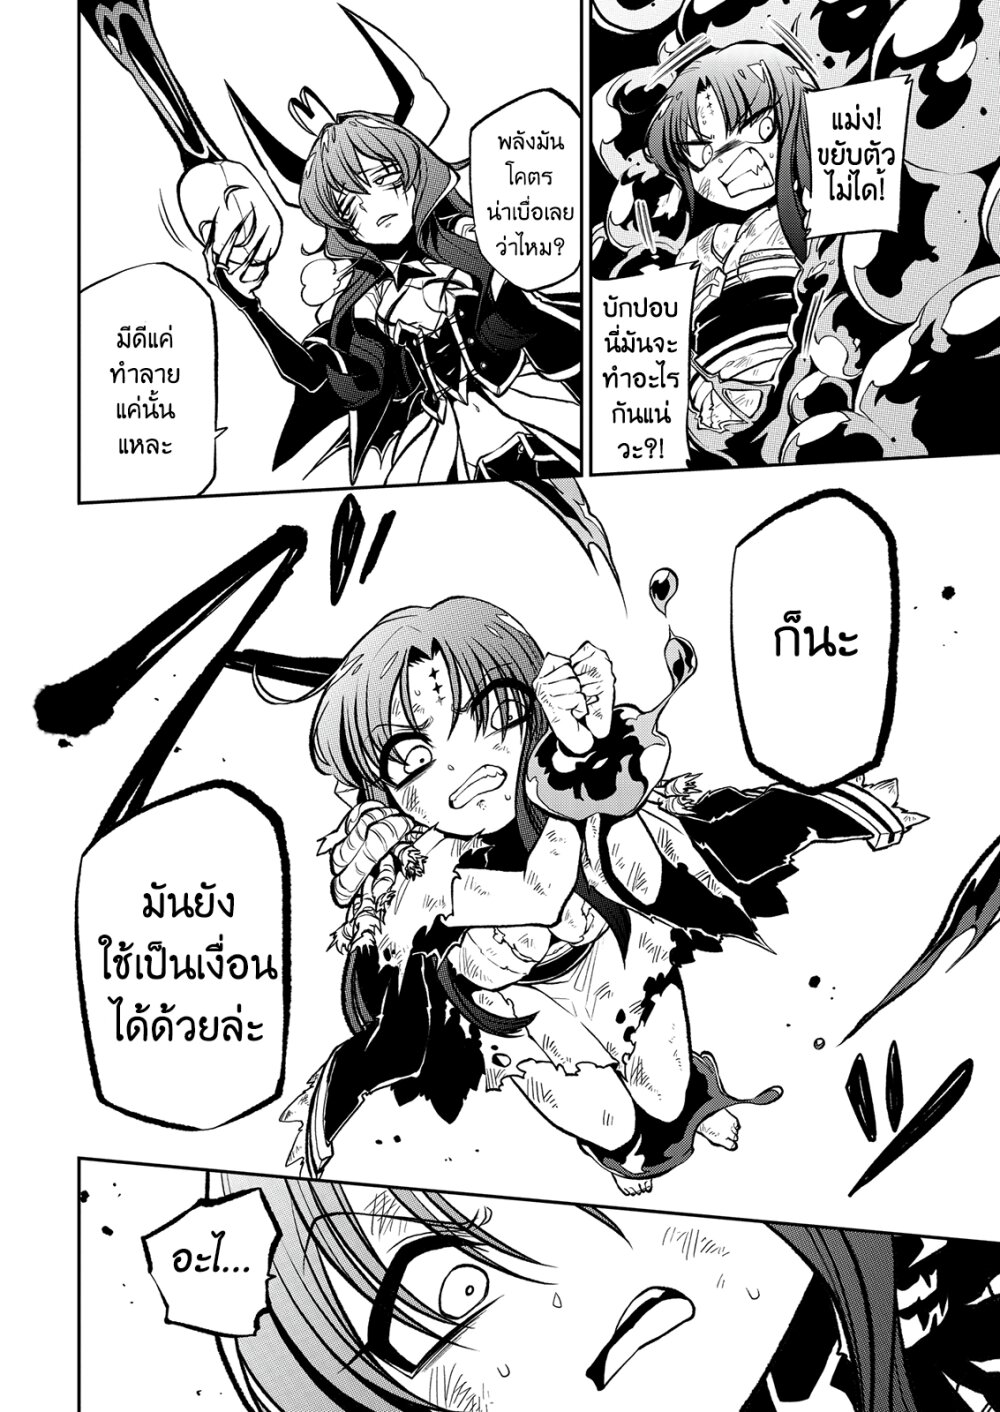 Looking up to Magical Girls 20 (12)